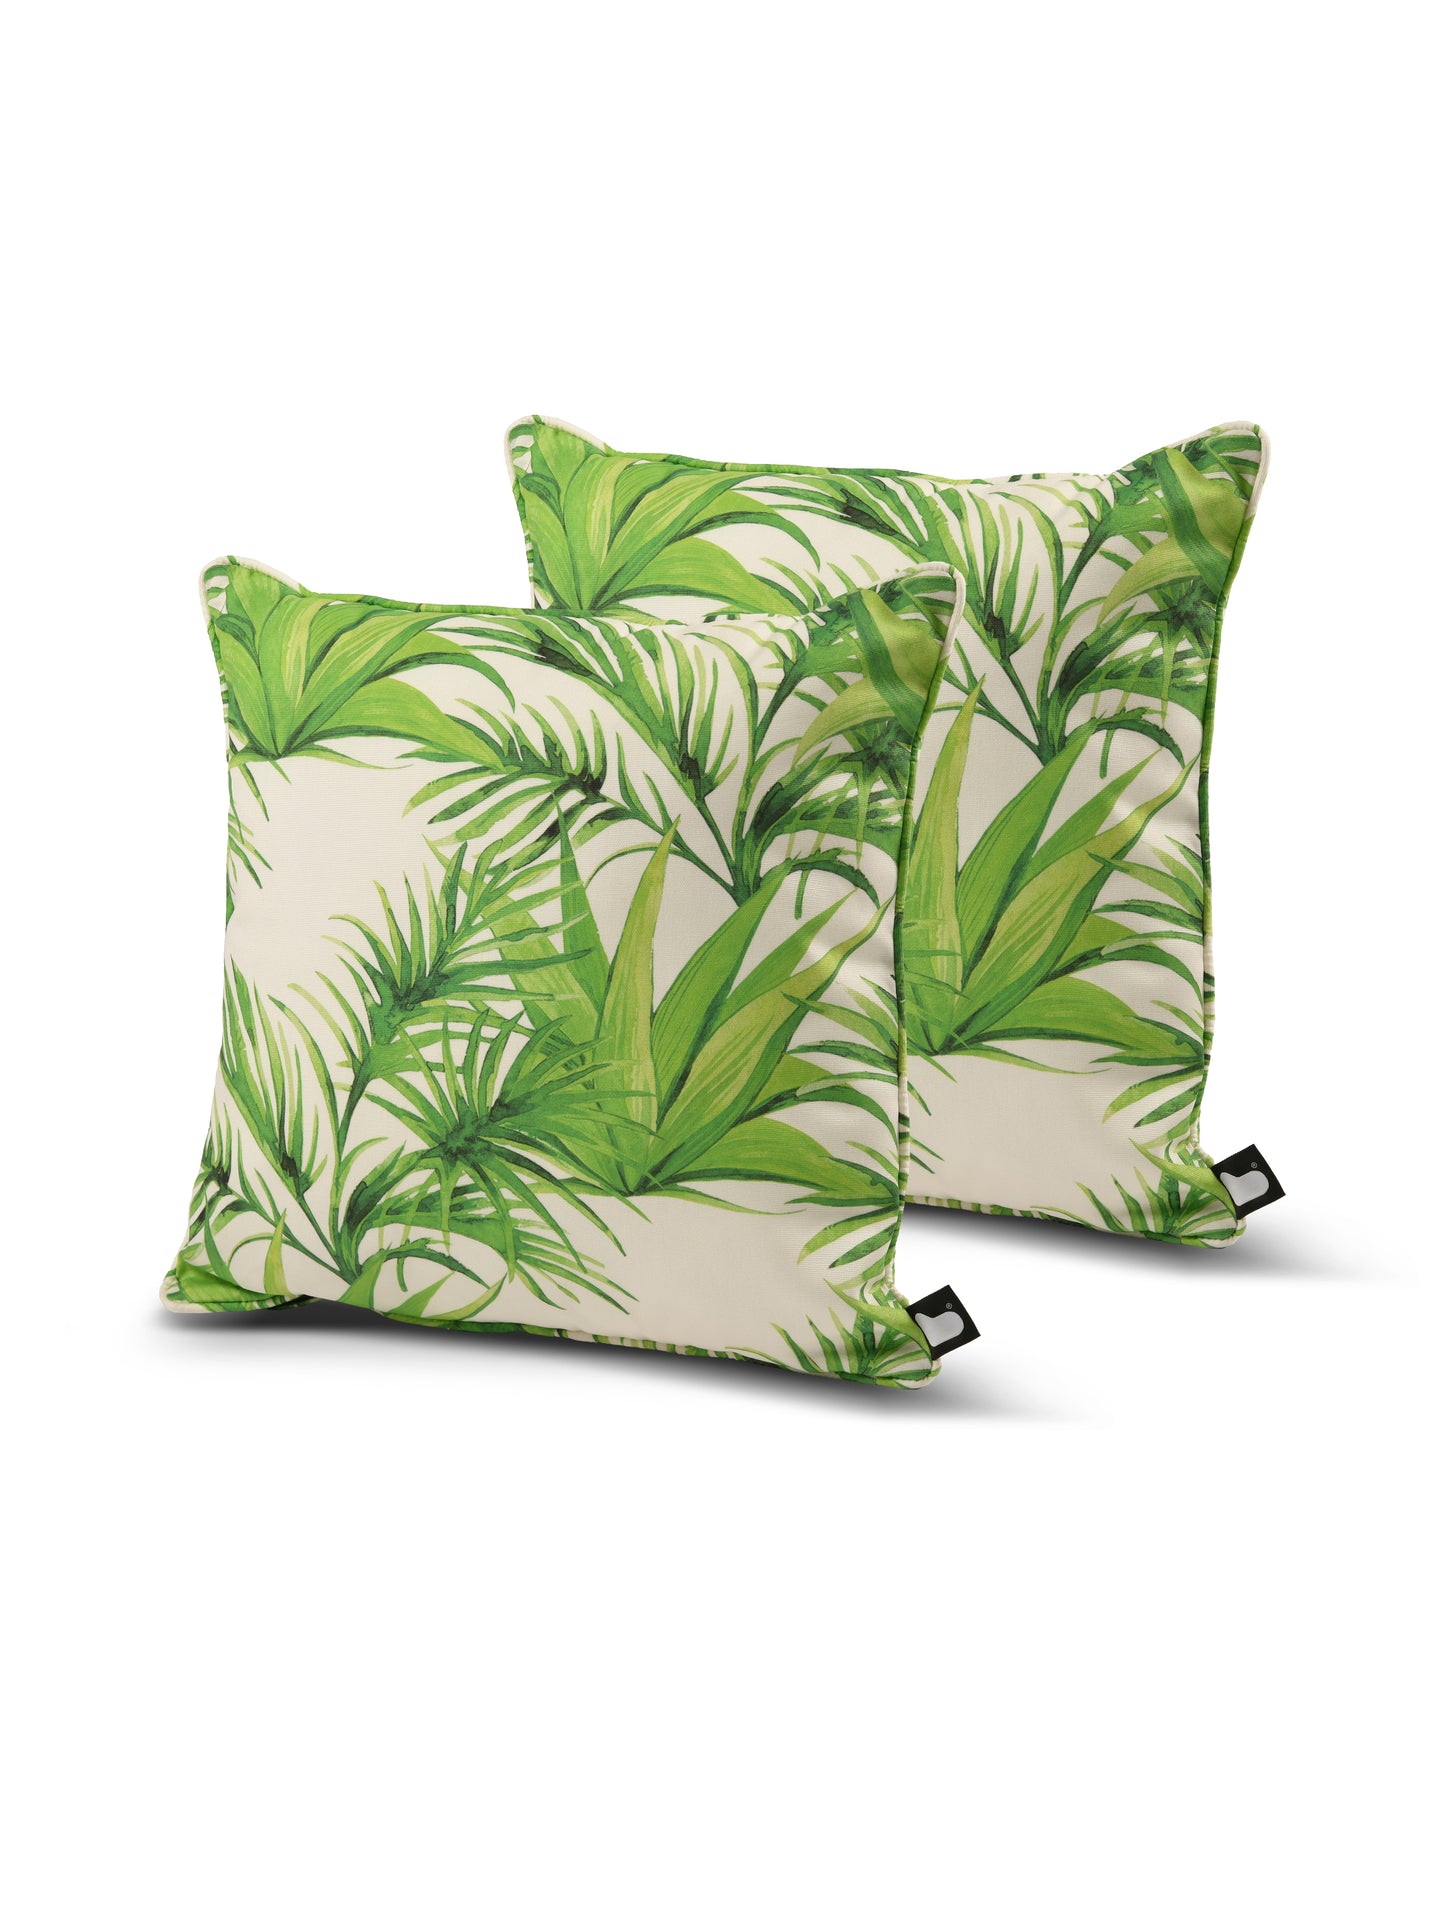 Two square throw pillows from Brisks feature green tropical leaf prints on a white background. The vibrant foliage design, in various shades of green, creates a lush and lively look. Made with UV-resistant and splash-proof fabric, the pillows have small black tags on the bottom corners.